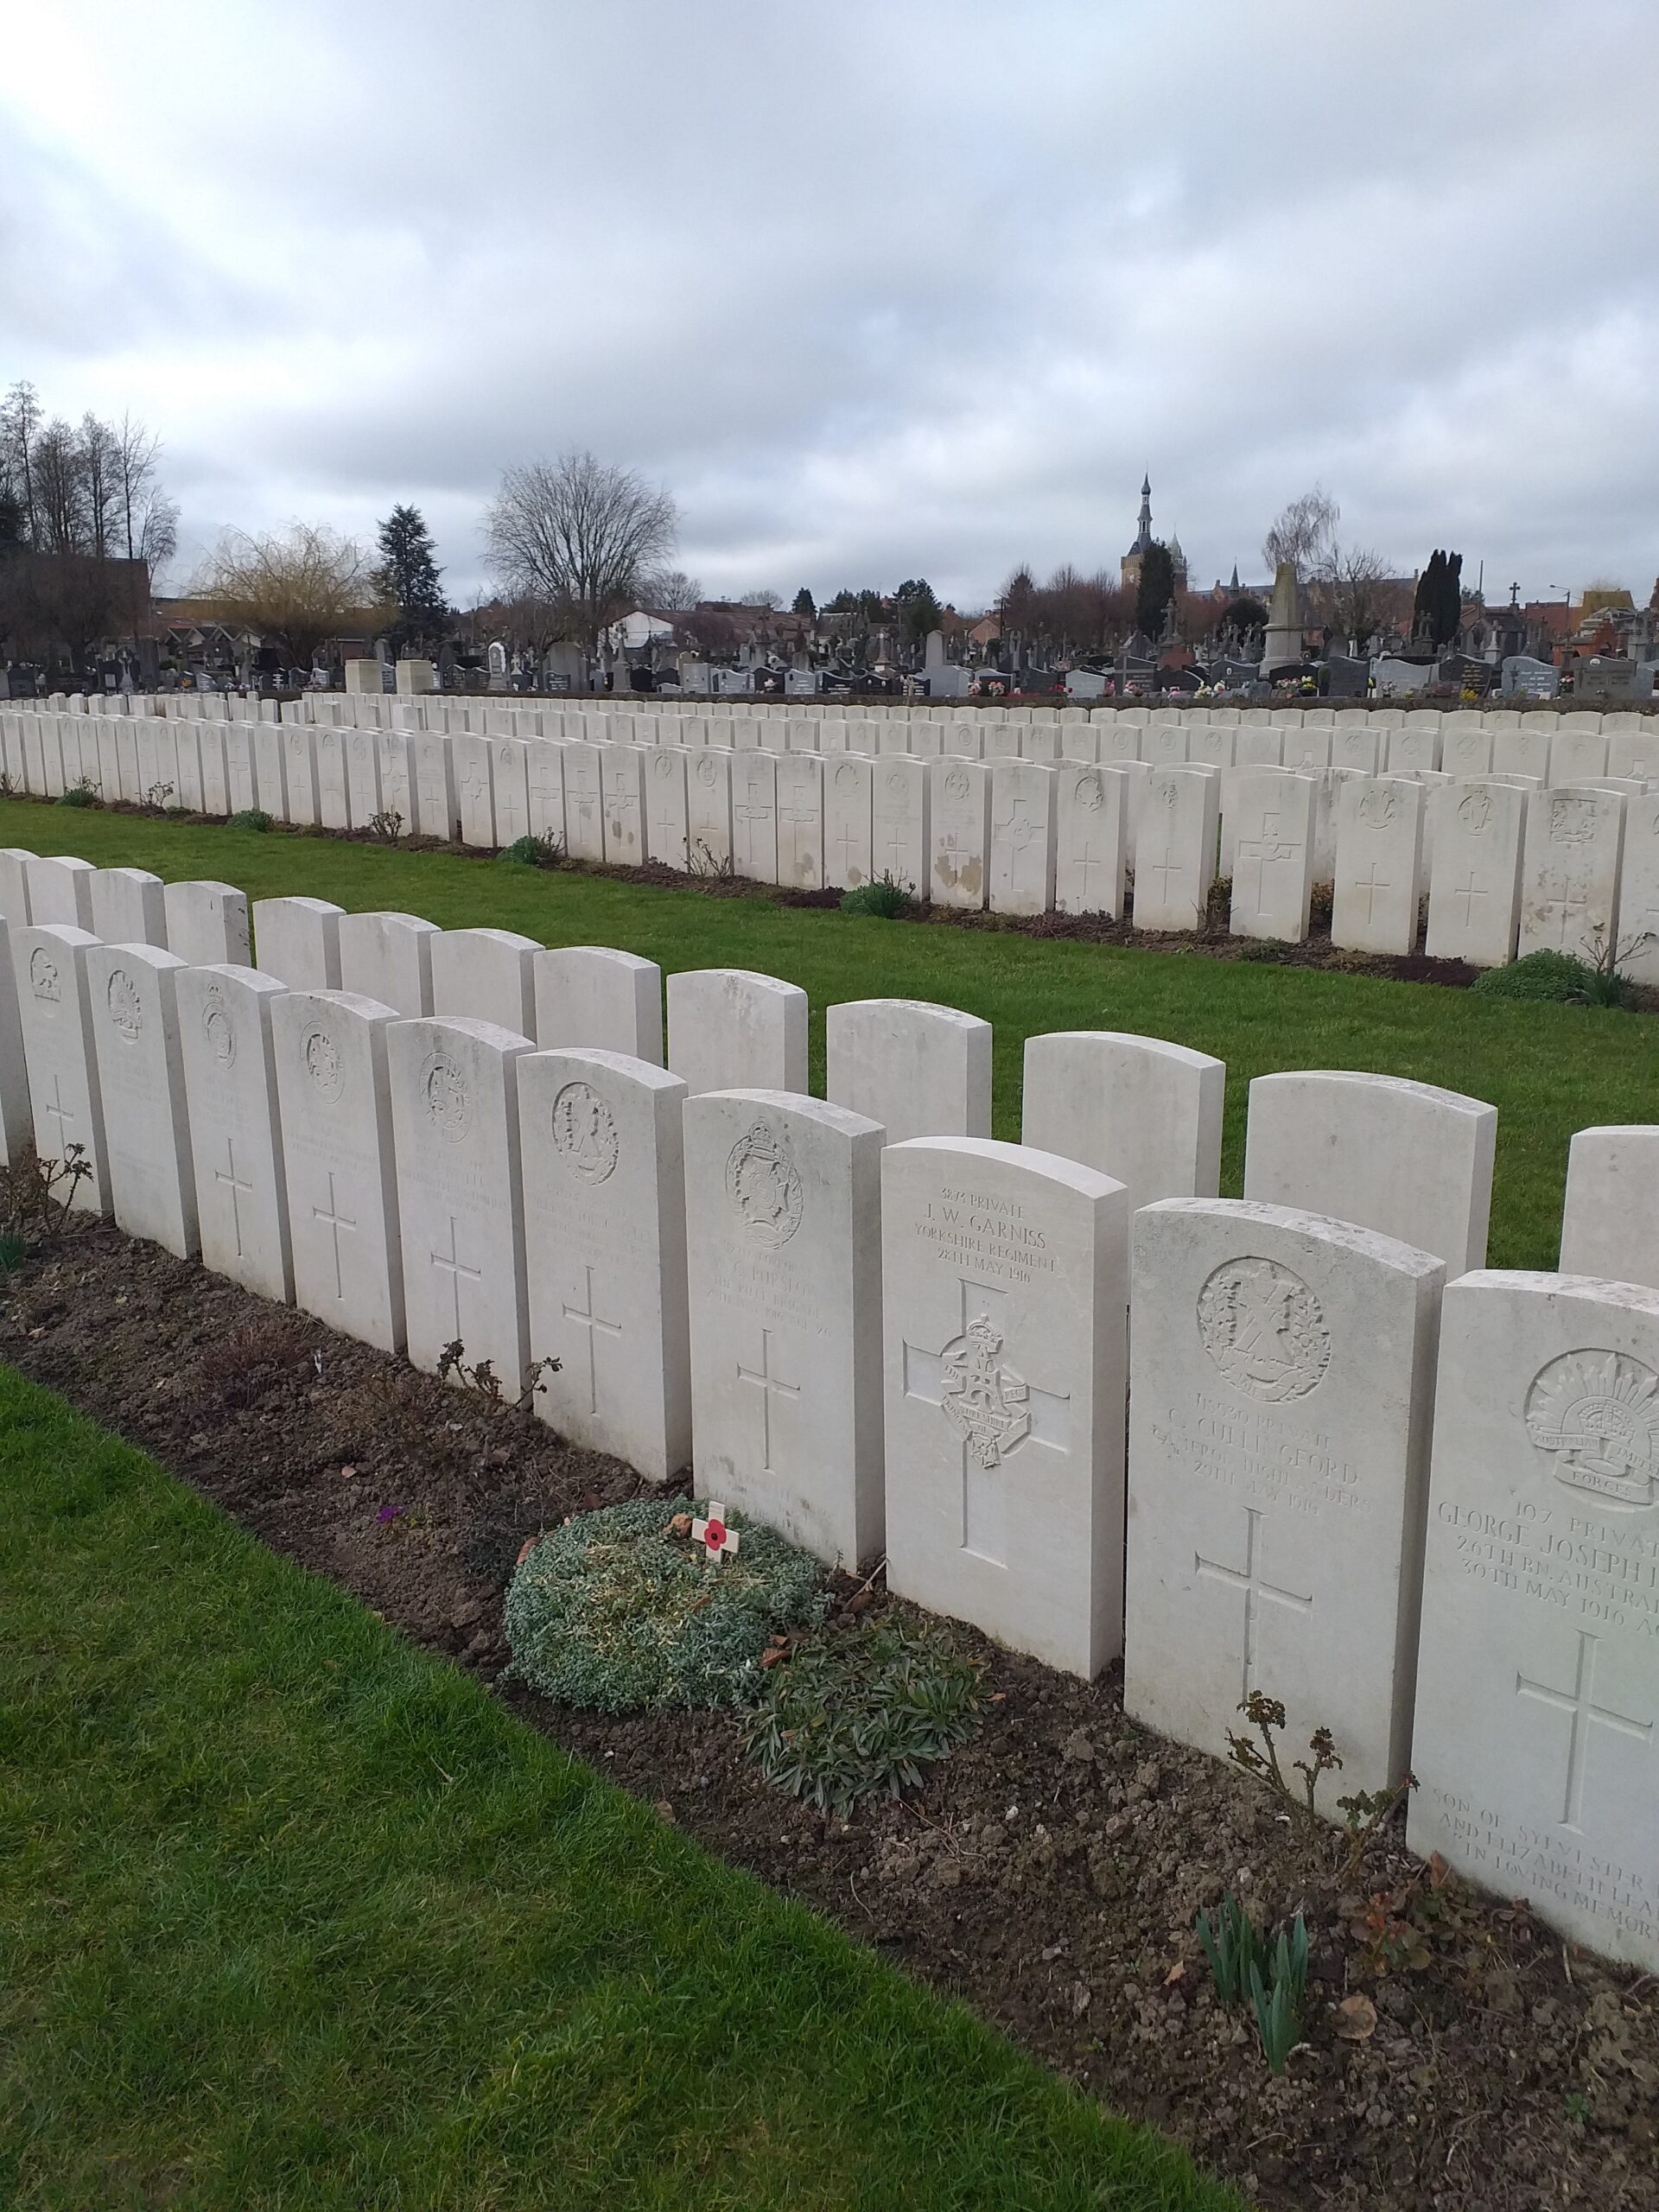 Rows of Commonwealth War Graves Commission headstones in the cemetery at Balieul, Somme, France